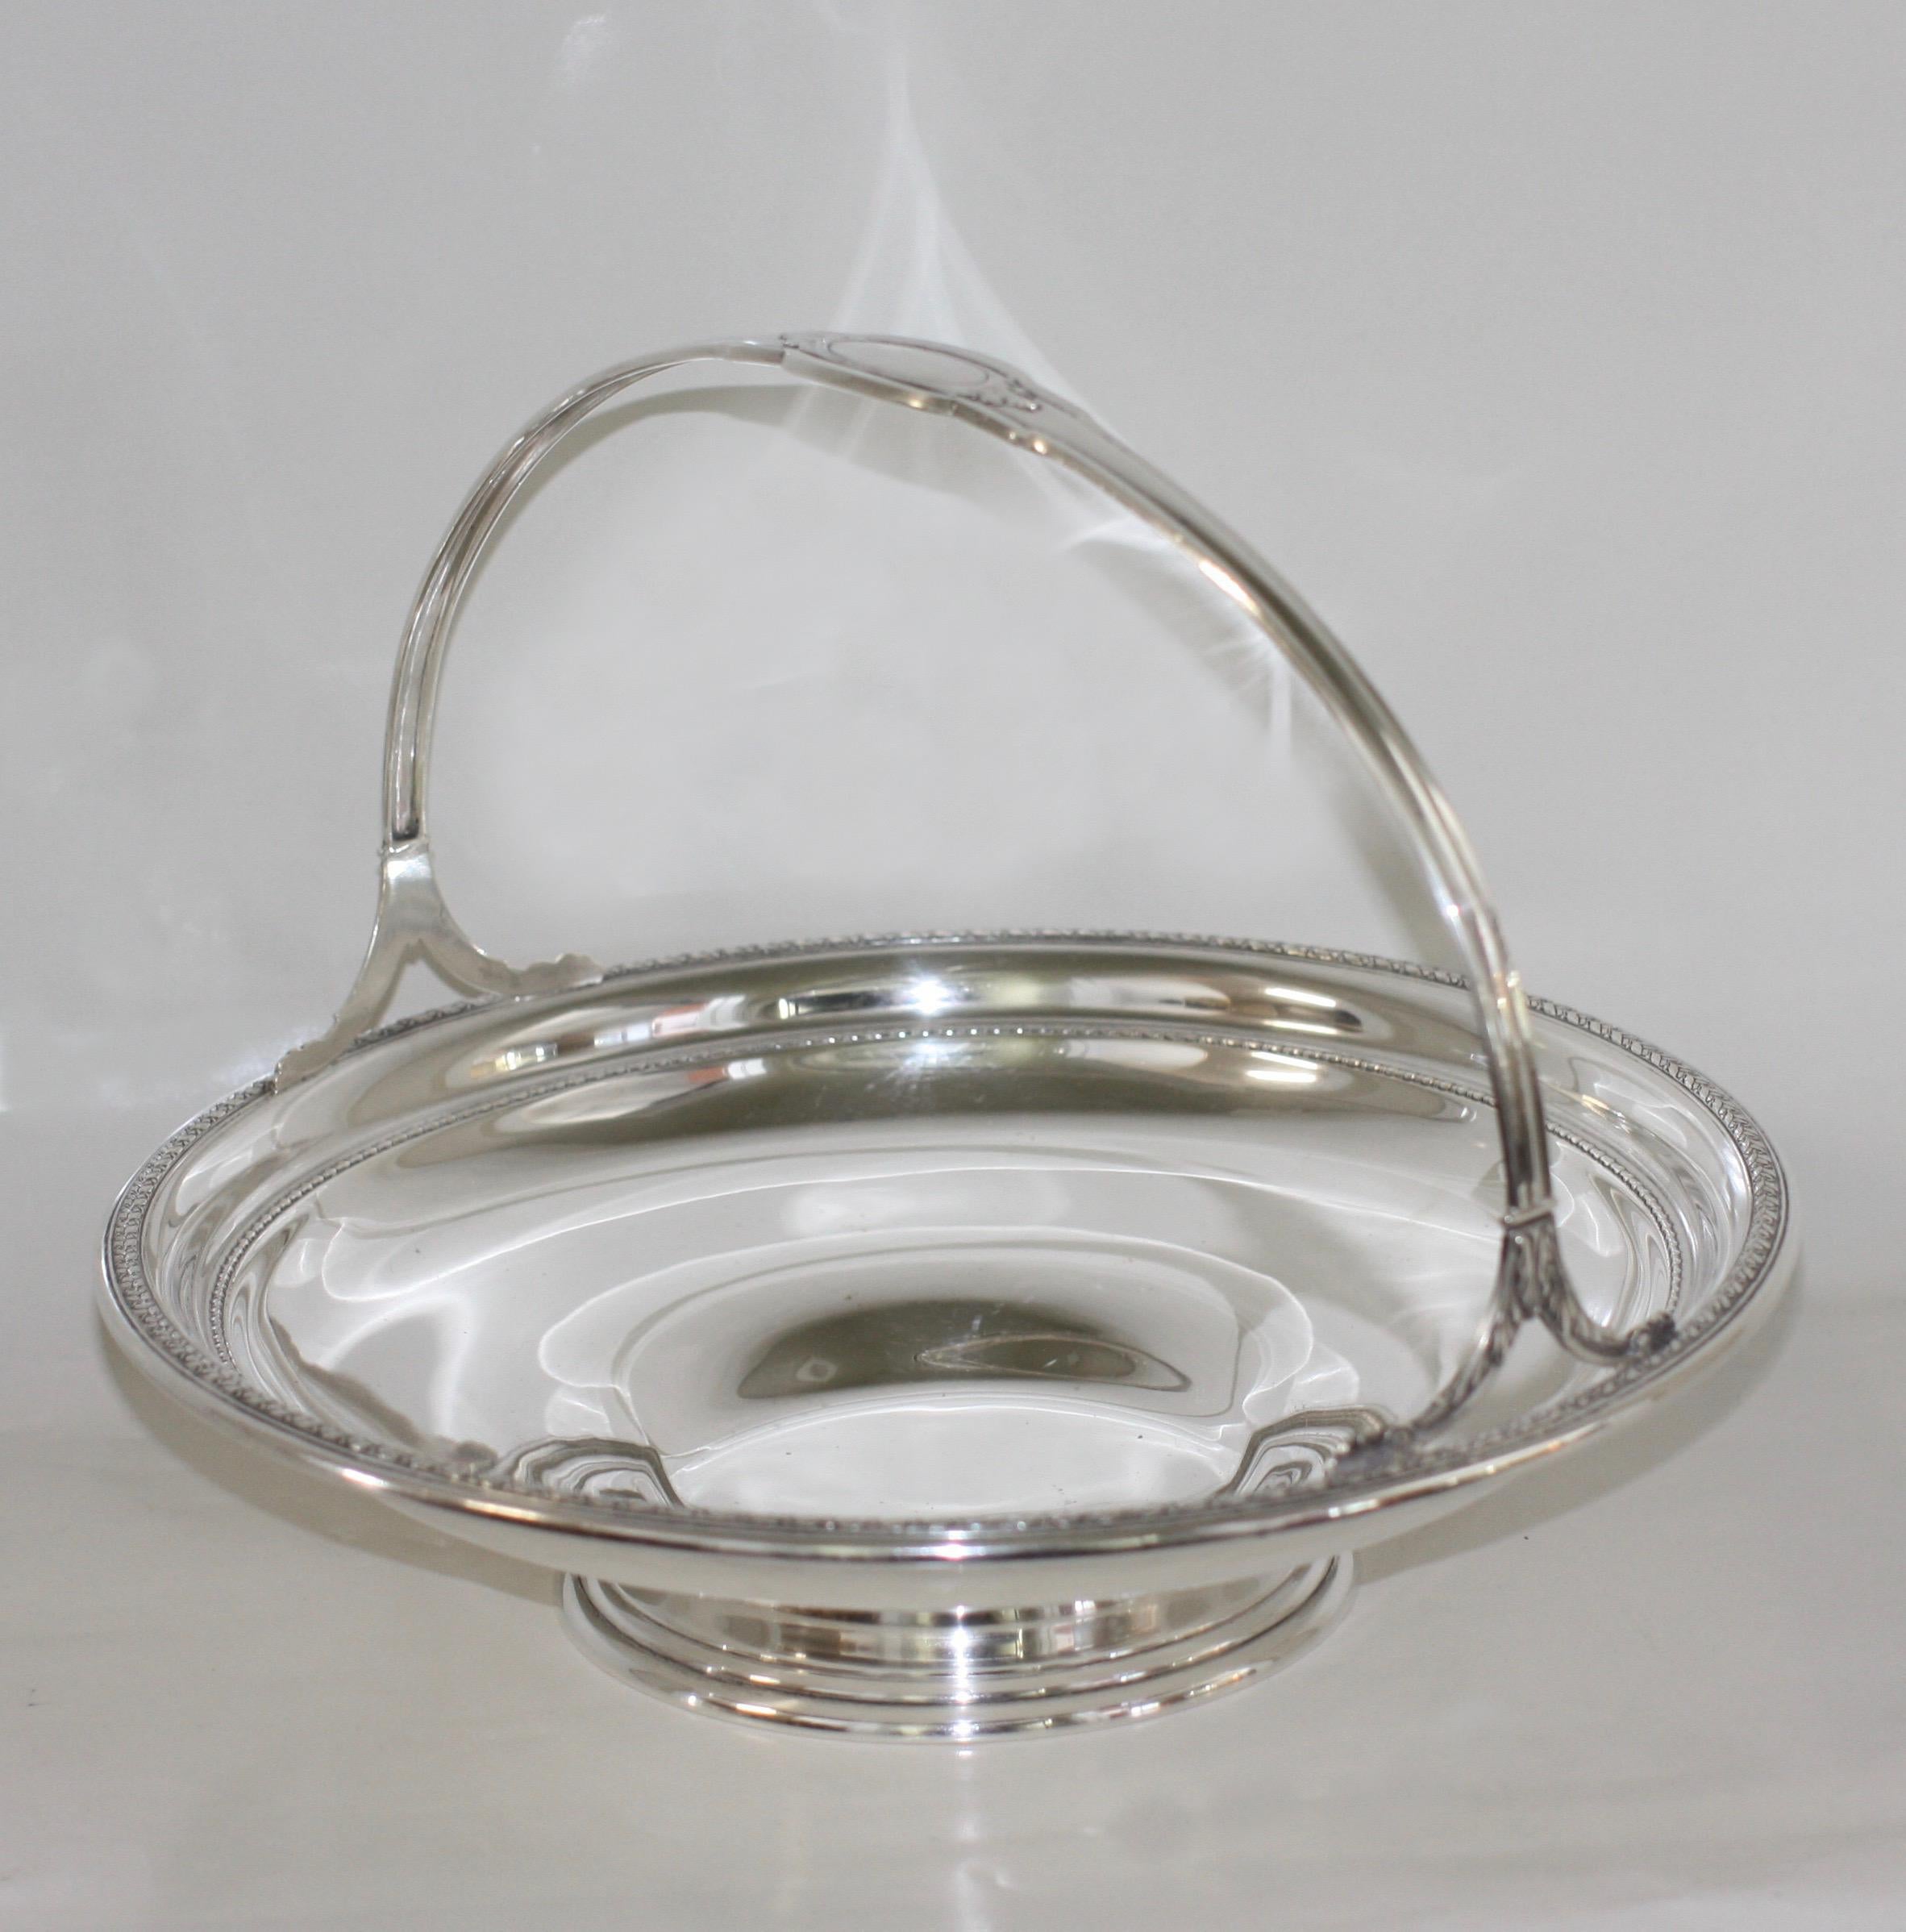 American Handled Silver Basket, Gorham In Good Condition For Sale In West Palm Beach, FL